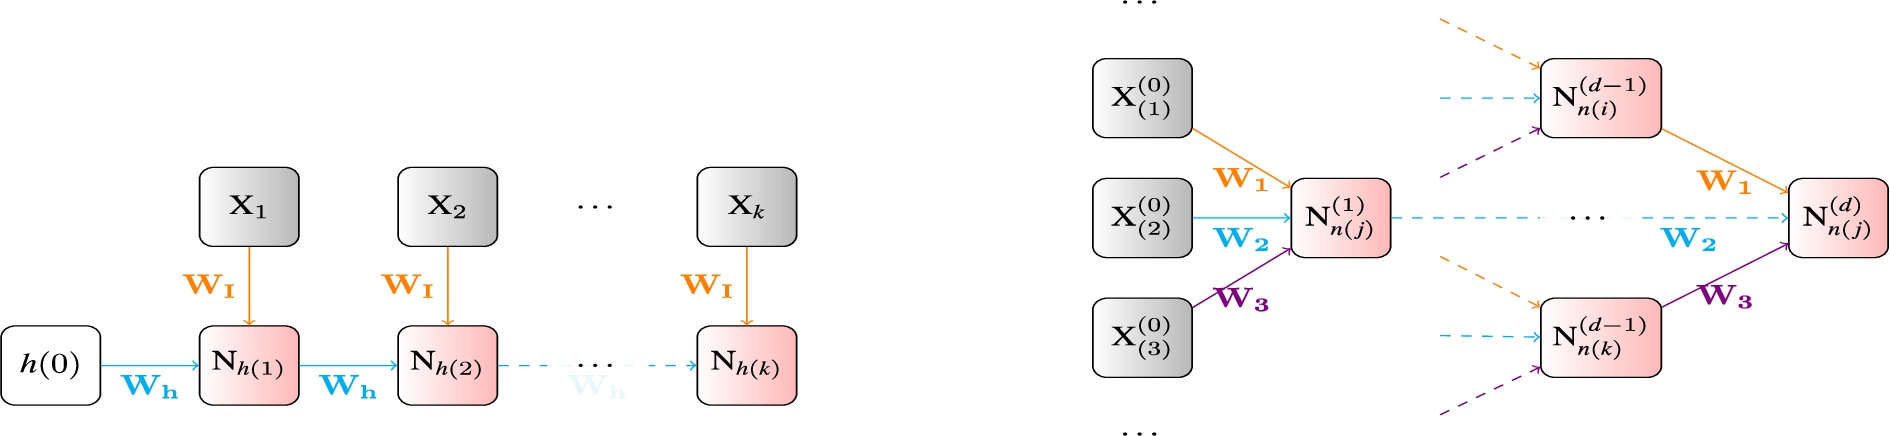 The symmetric weight-sharing patterns in the structured computation graphs of recurrent (left) and recursive (right) neural models.